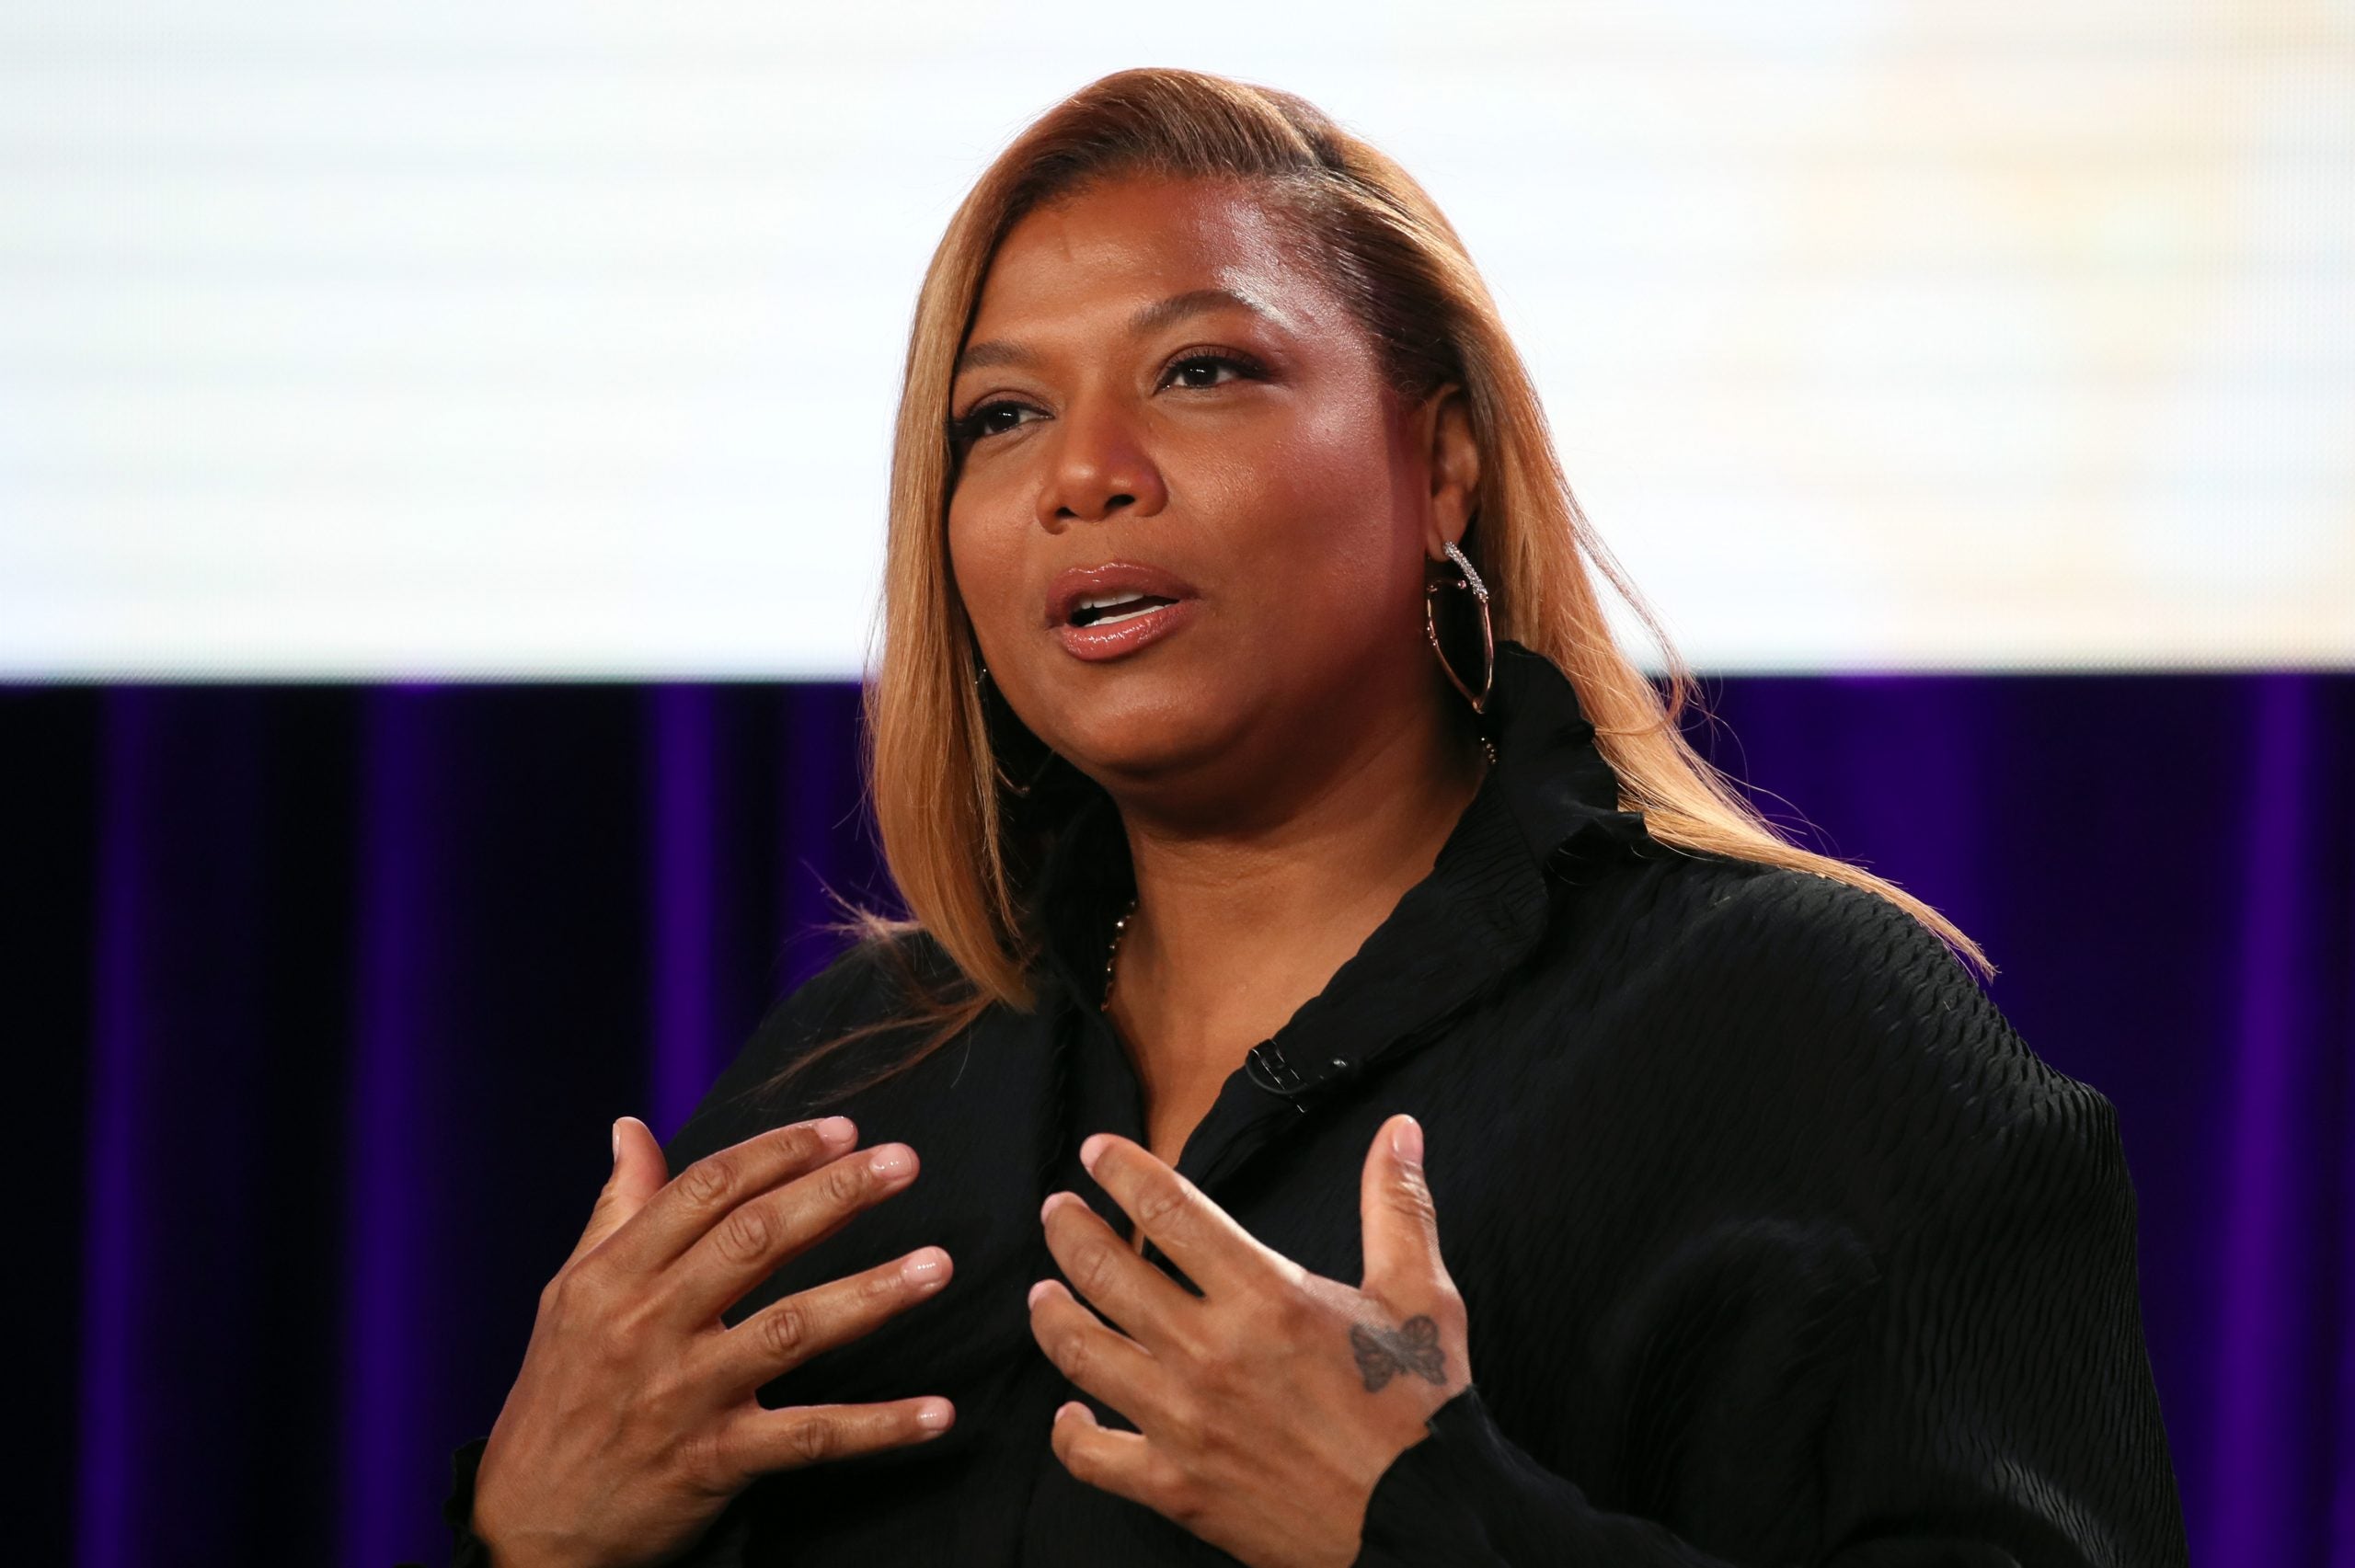 Queen Latifah To Host Facebook Watch Special 'Change Together'